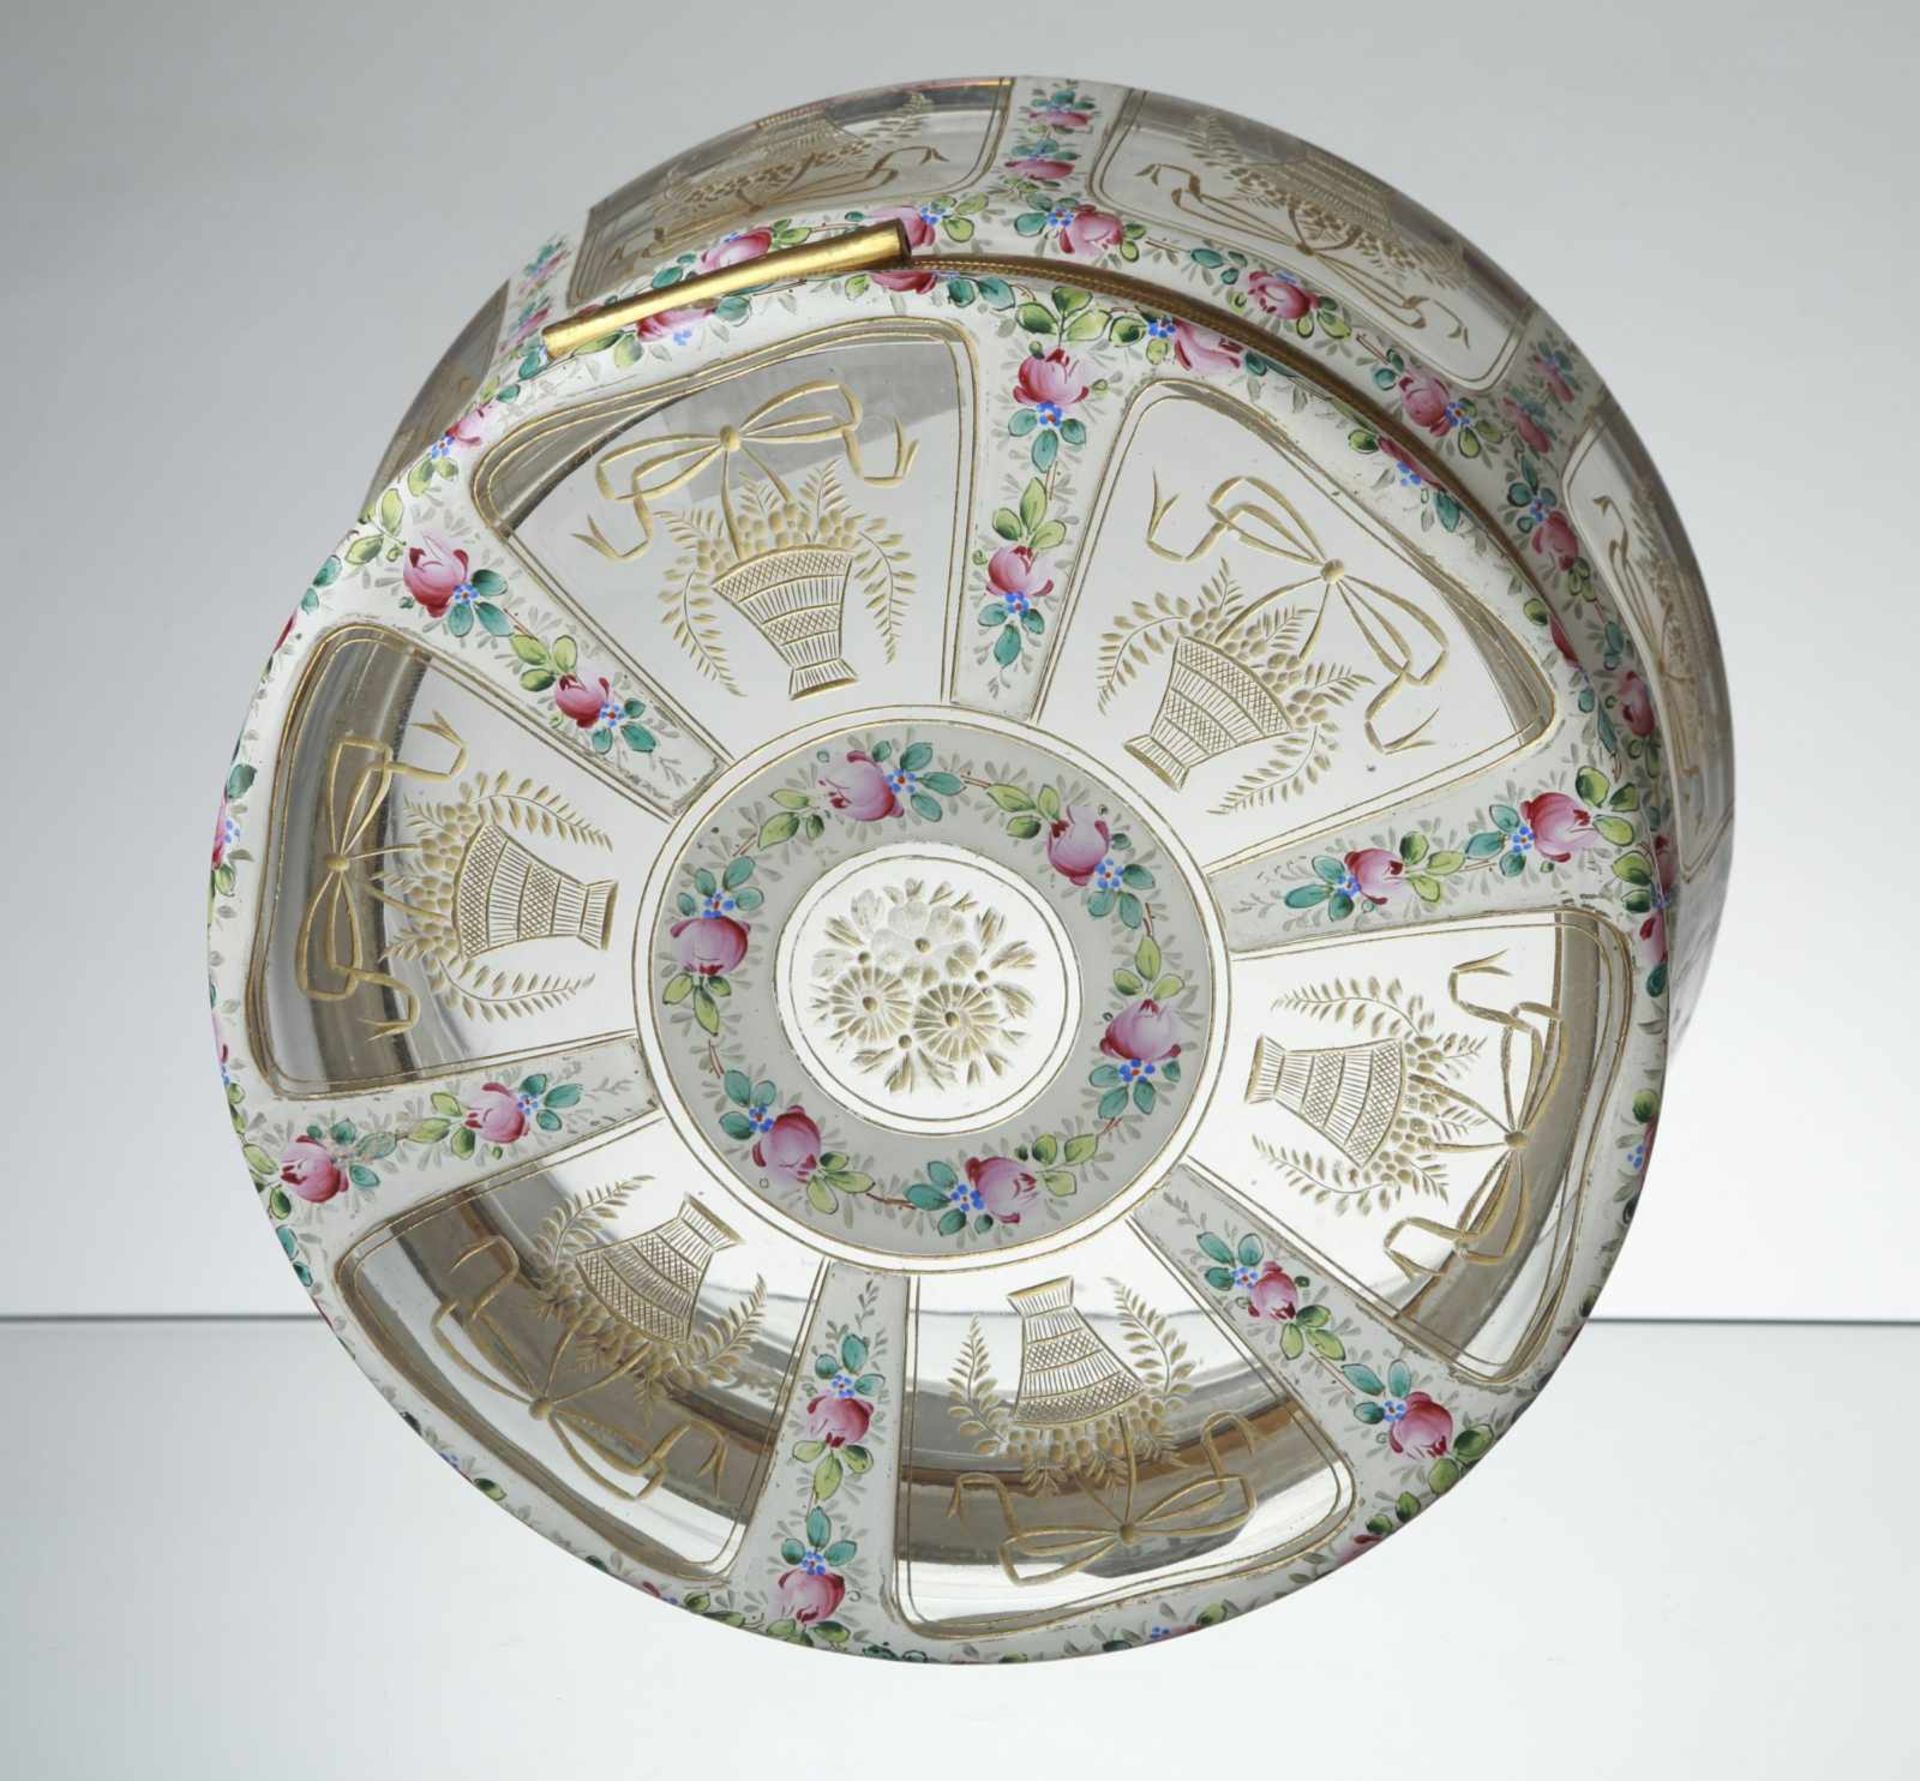 Czech glass bowl decorated by enamel Bohemia, late 19th century, clear glass, metal assembly, gilded - Bild 2 aus 2